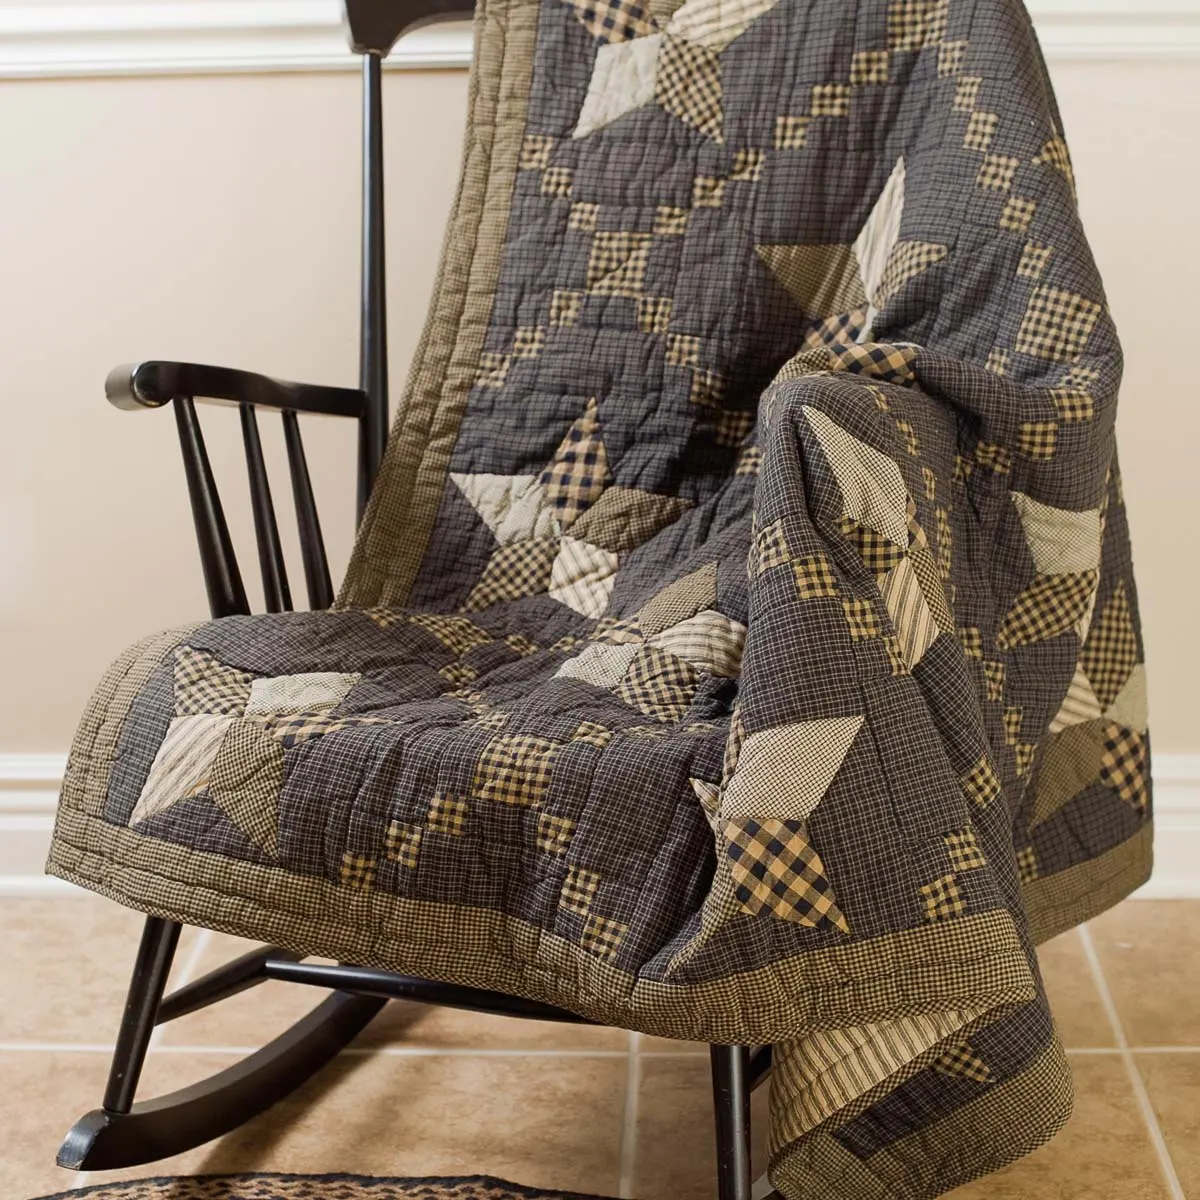 Farmhouse Star Quilted Throw 60x50 display on chair